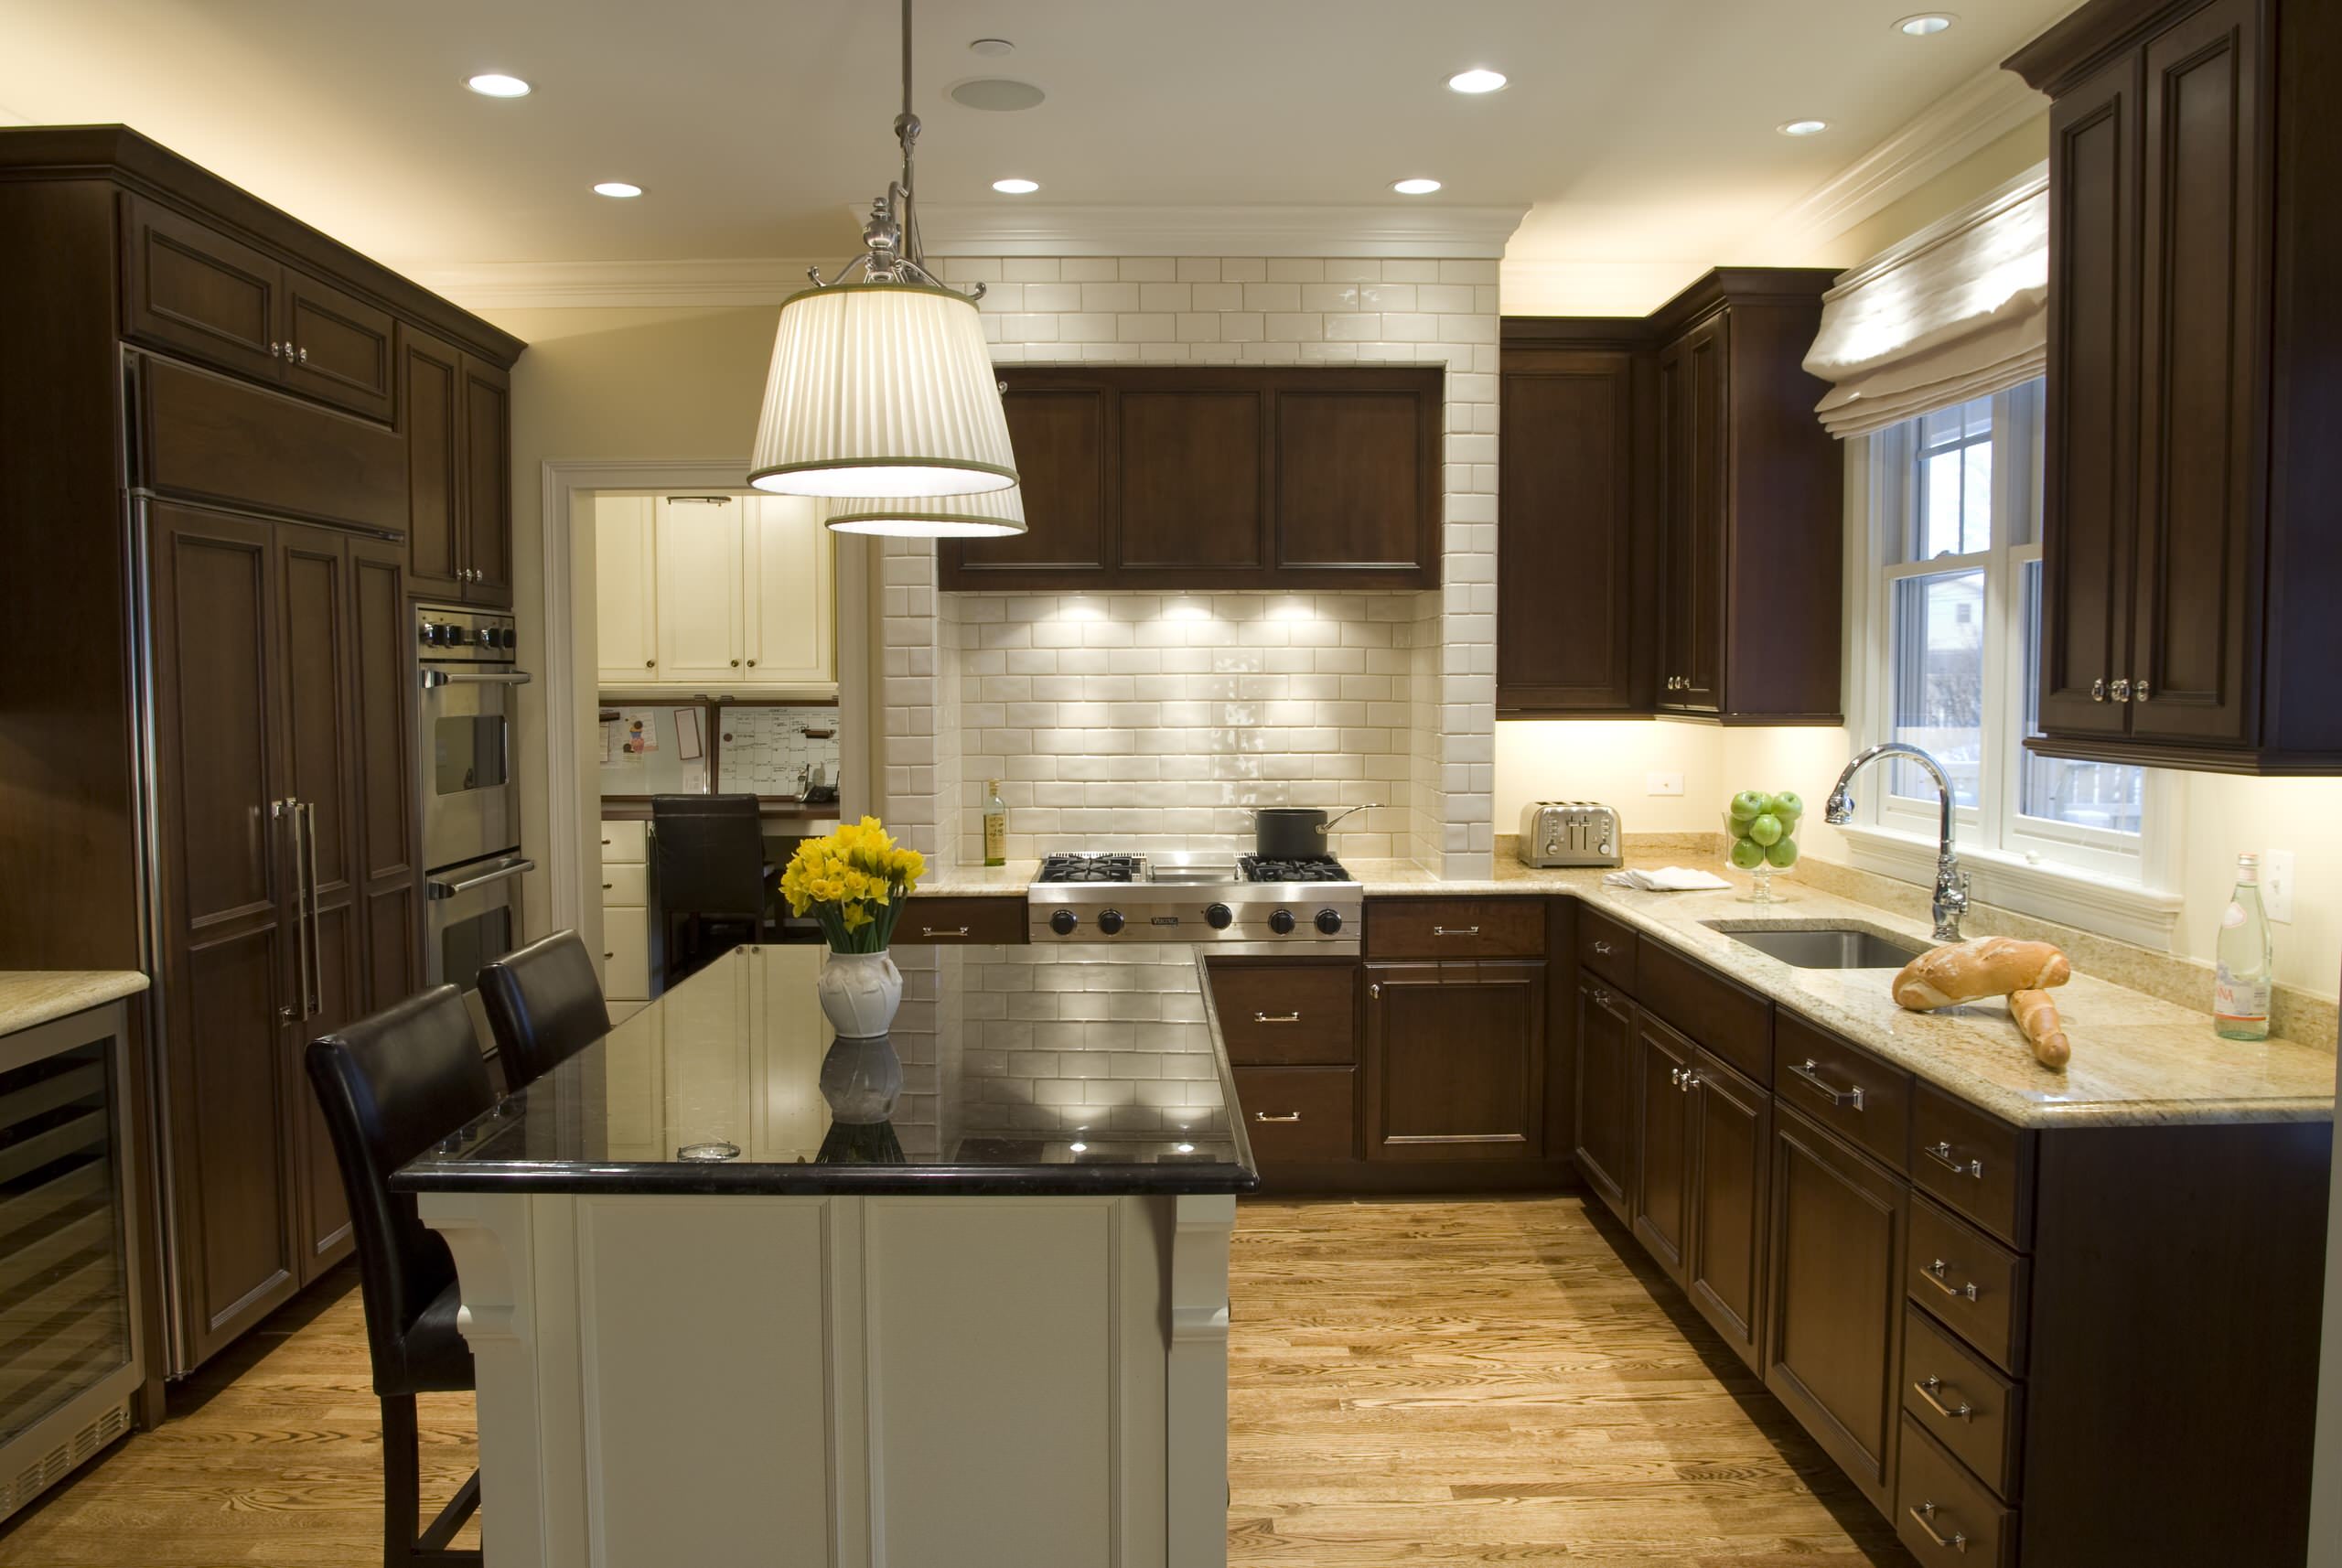 What color should i paint my kitchen with white cabinets in Traditional Kitchen? breakfast bar ceiling lighting dark wood cabinets eat in kitchen glass front cabinets kitchen island